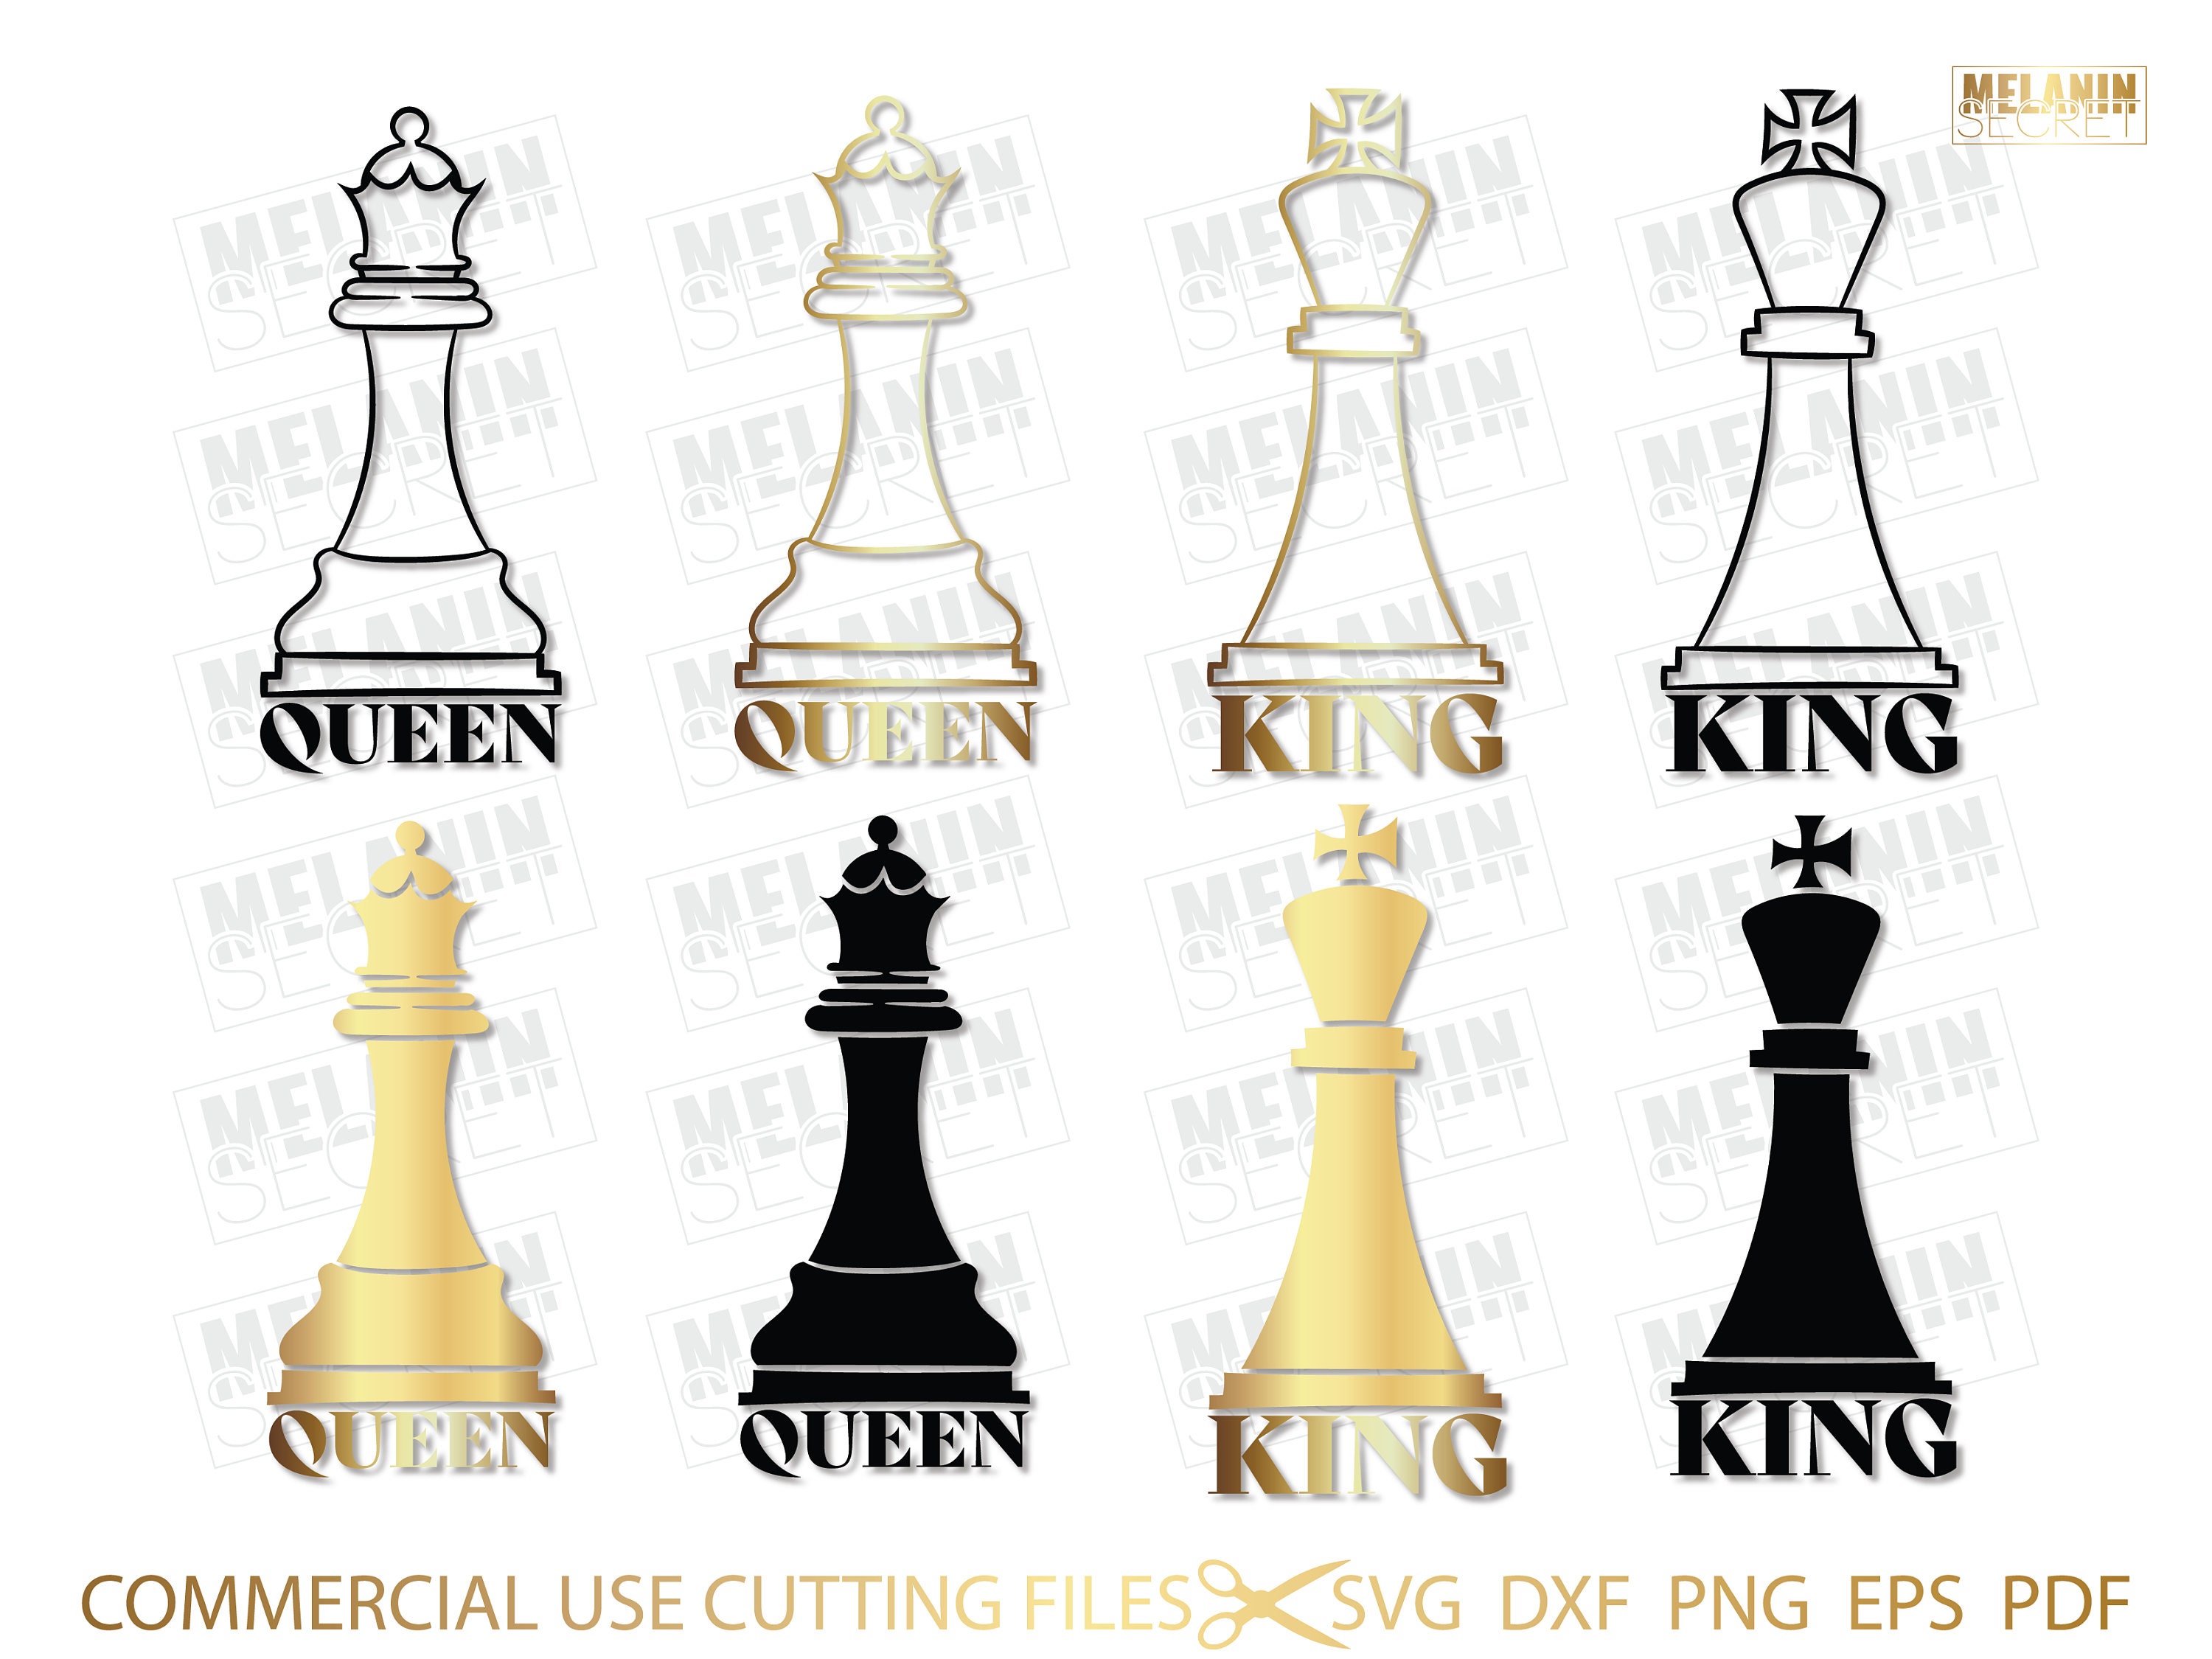 Which is Queen and Which is King - Chess Forums 